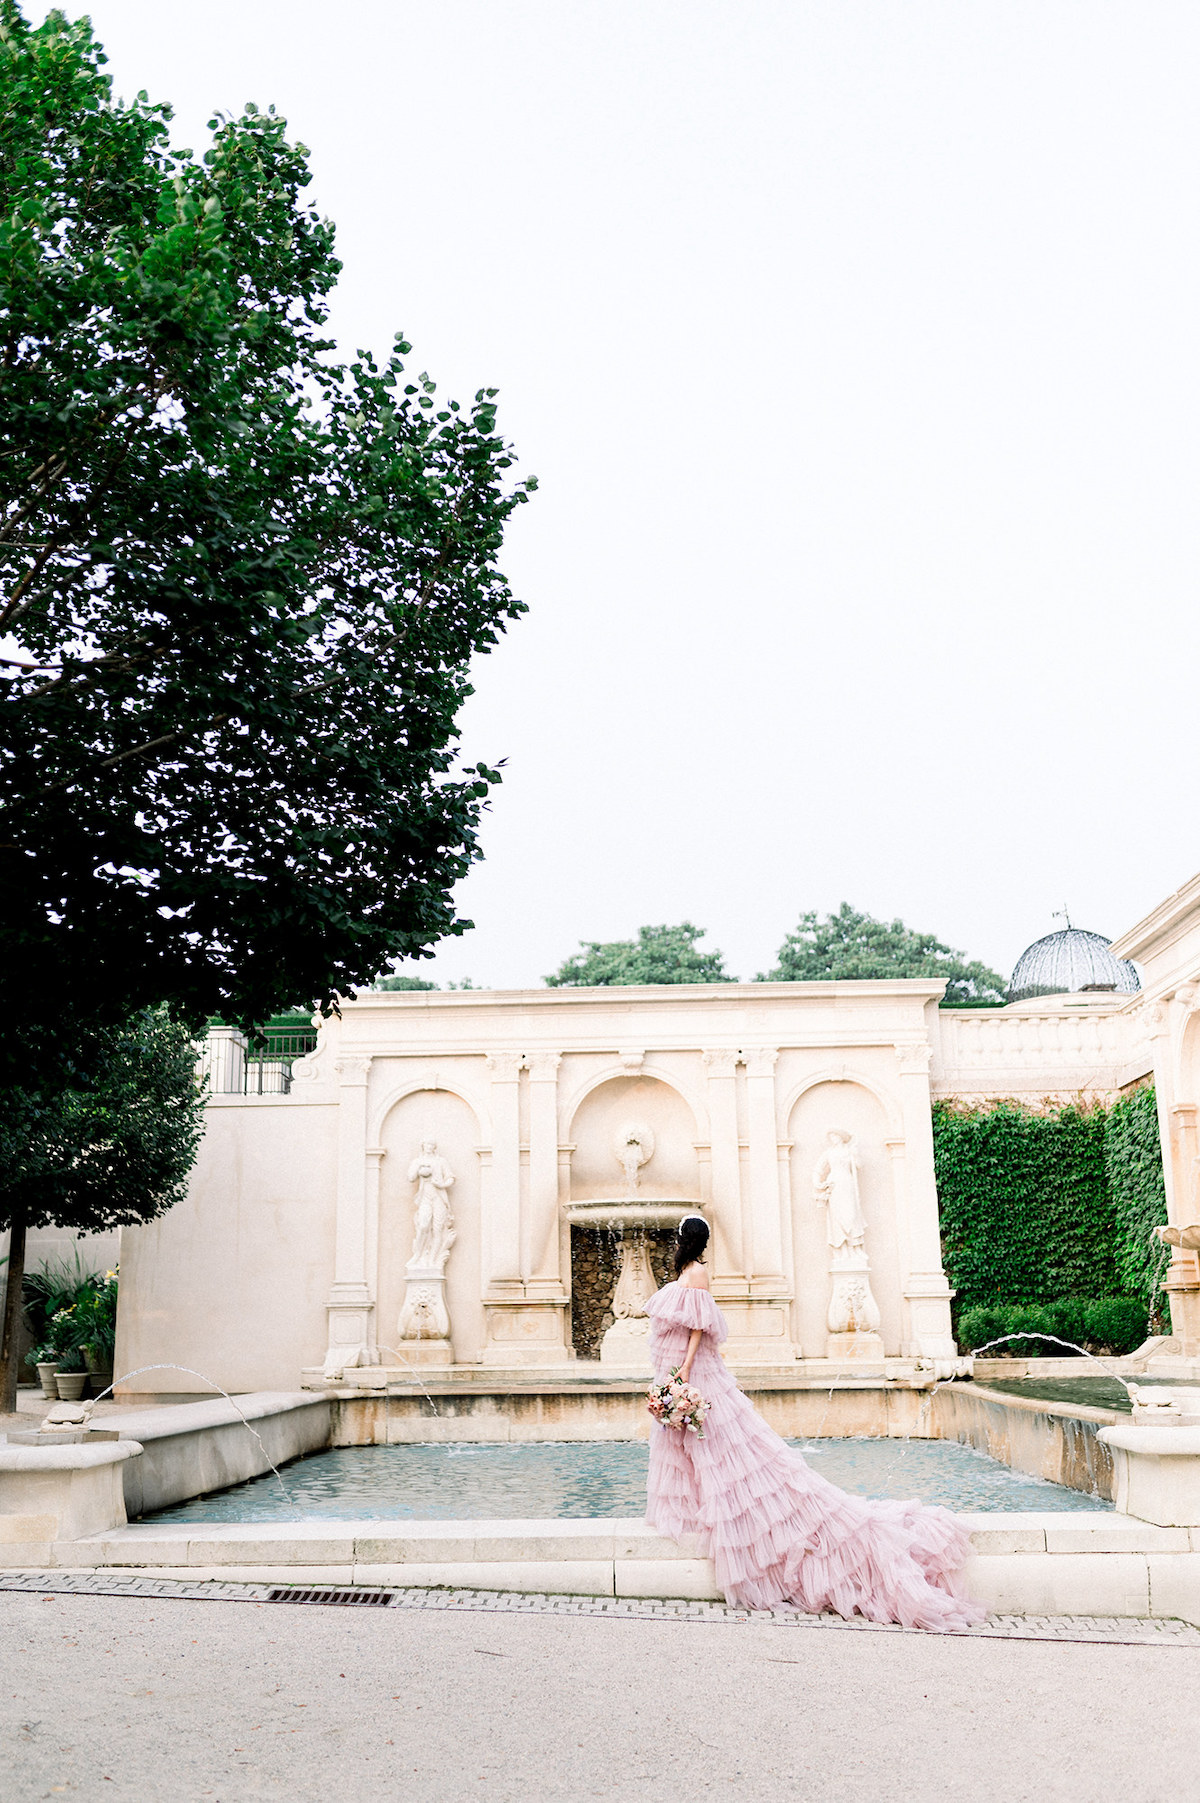 Karla exudes high-fashion elegance in the couture gown, striking a fierce and confident pose amidst the enchanting backdrop of Longwood Gardens.